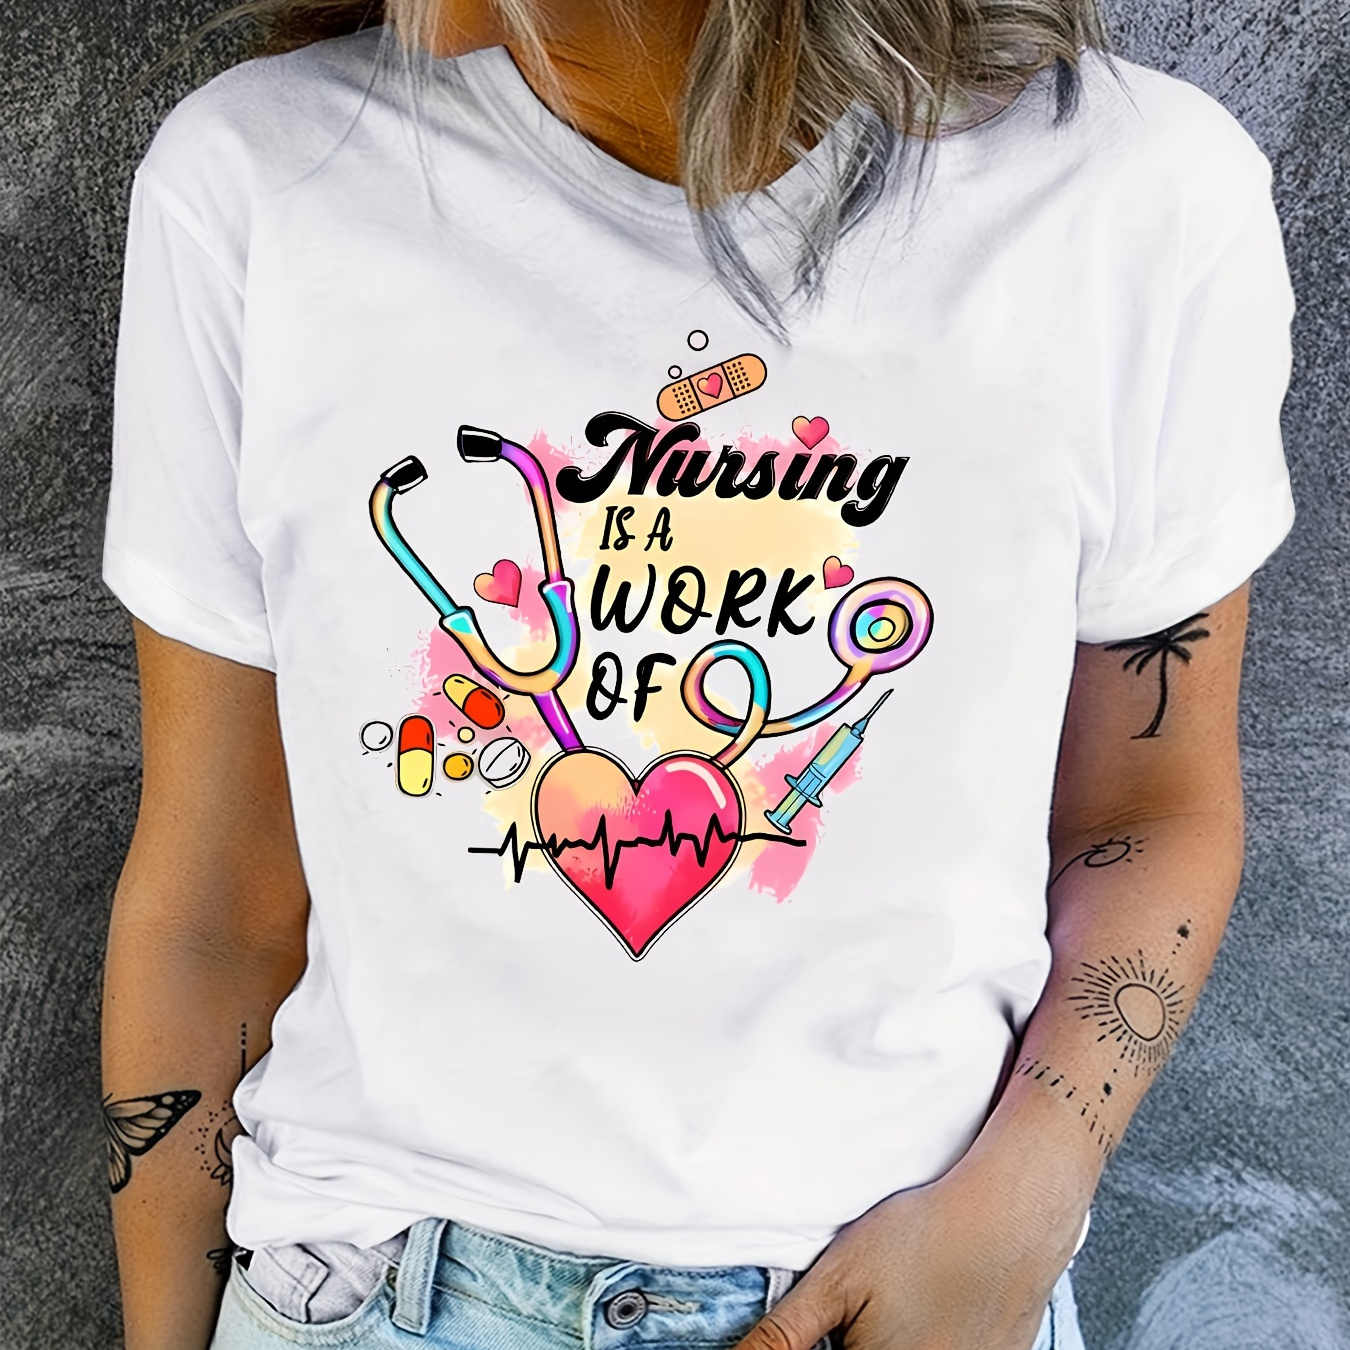 

Nurse Day Print T-shirt, Casual Crew Neck Short Sleeve Top For Spring & Summer, Women's Clothing